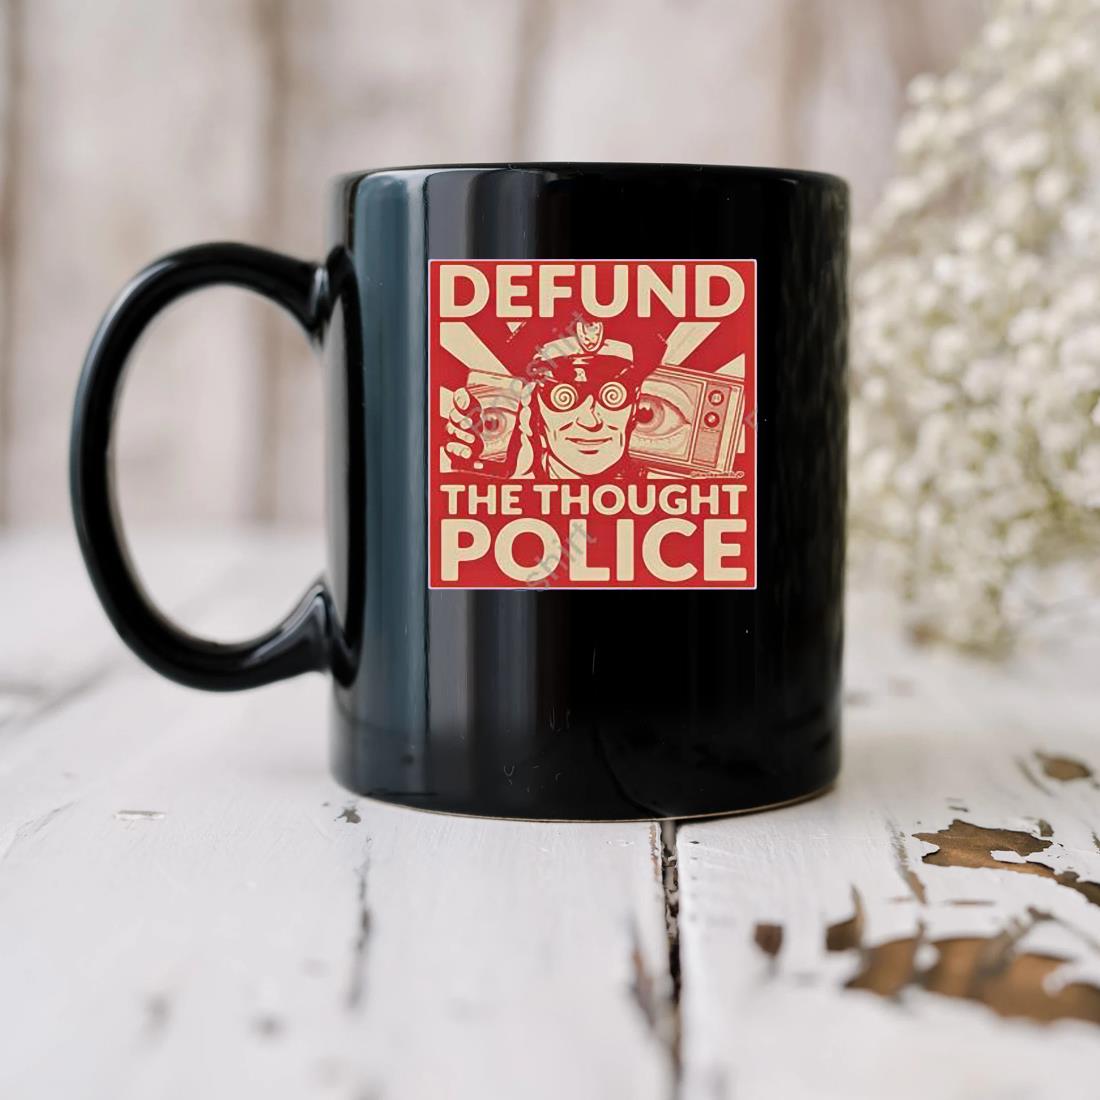 Jp Sears Defund The Thought Police Mug